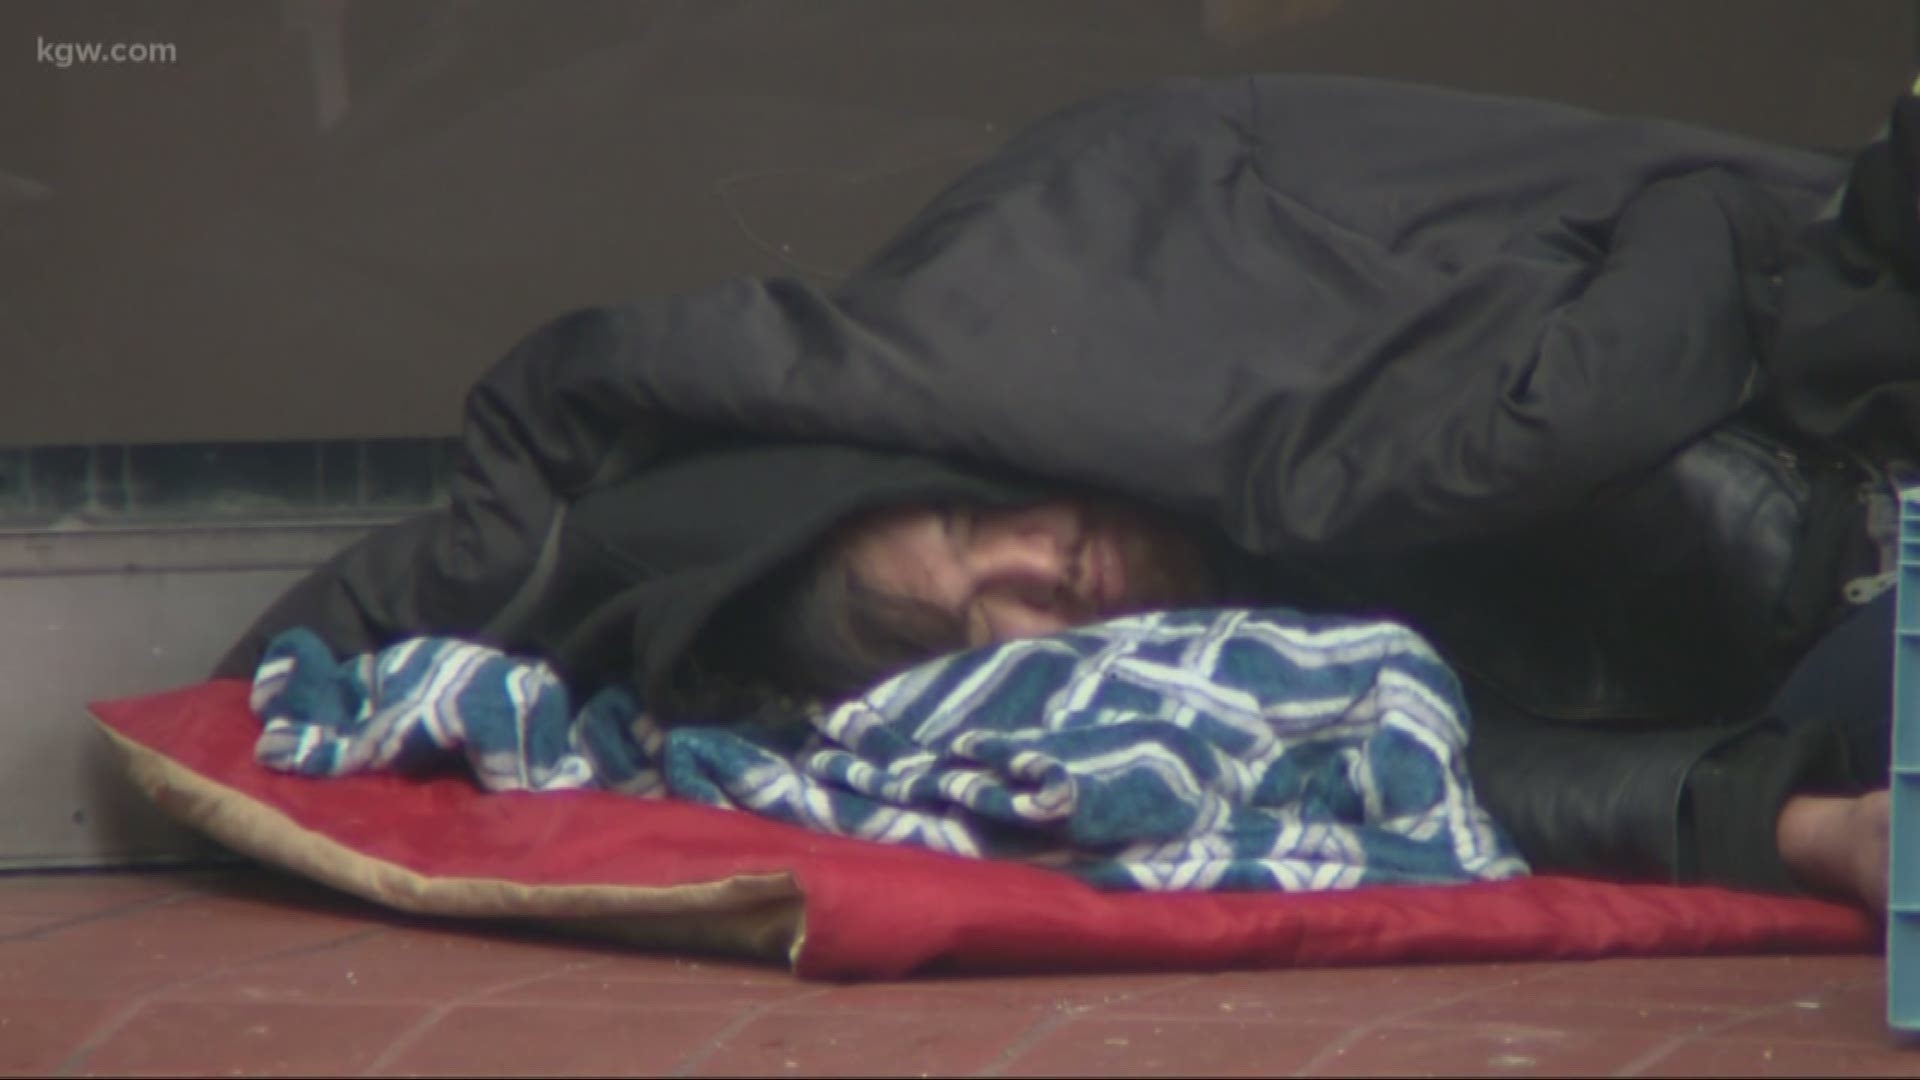 Oregon has the second most homeless people.